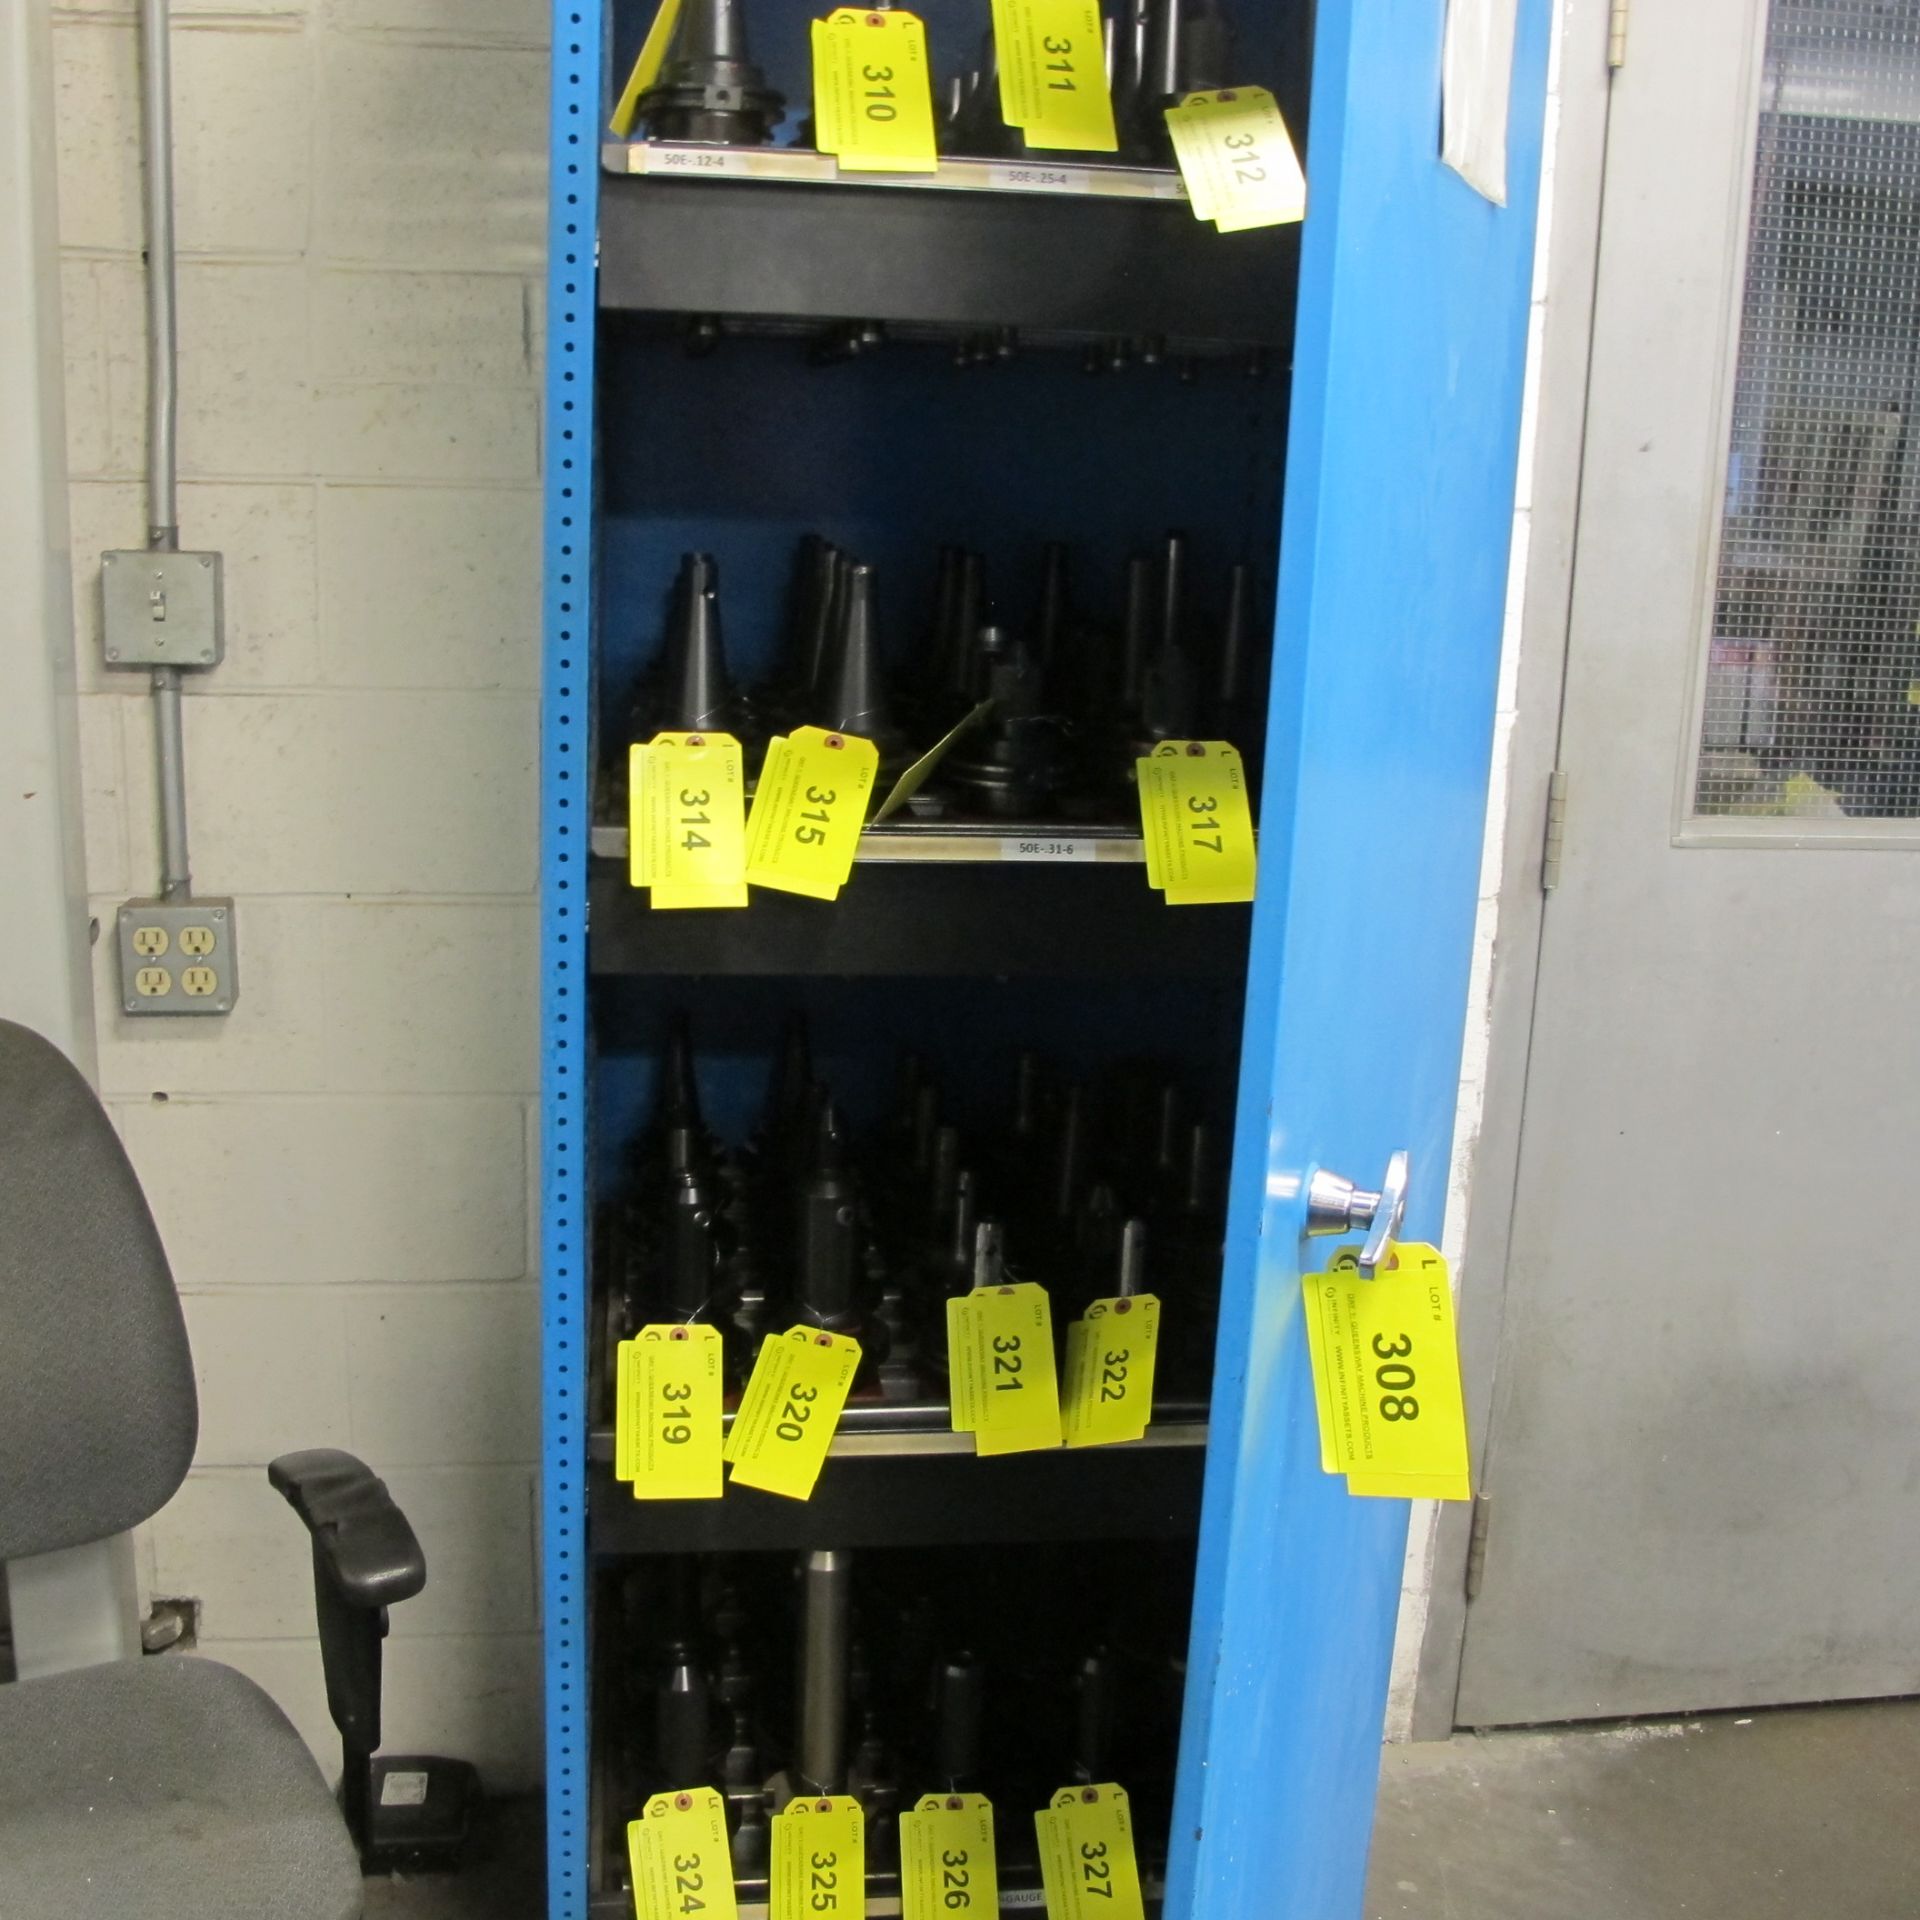 BULK BID - (100) CAT 50E TOOL HOLDERS W/ ATTACHMENTS - LOTS 309 TO LOT 328 INCLUSIVE (SUBJECT TO